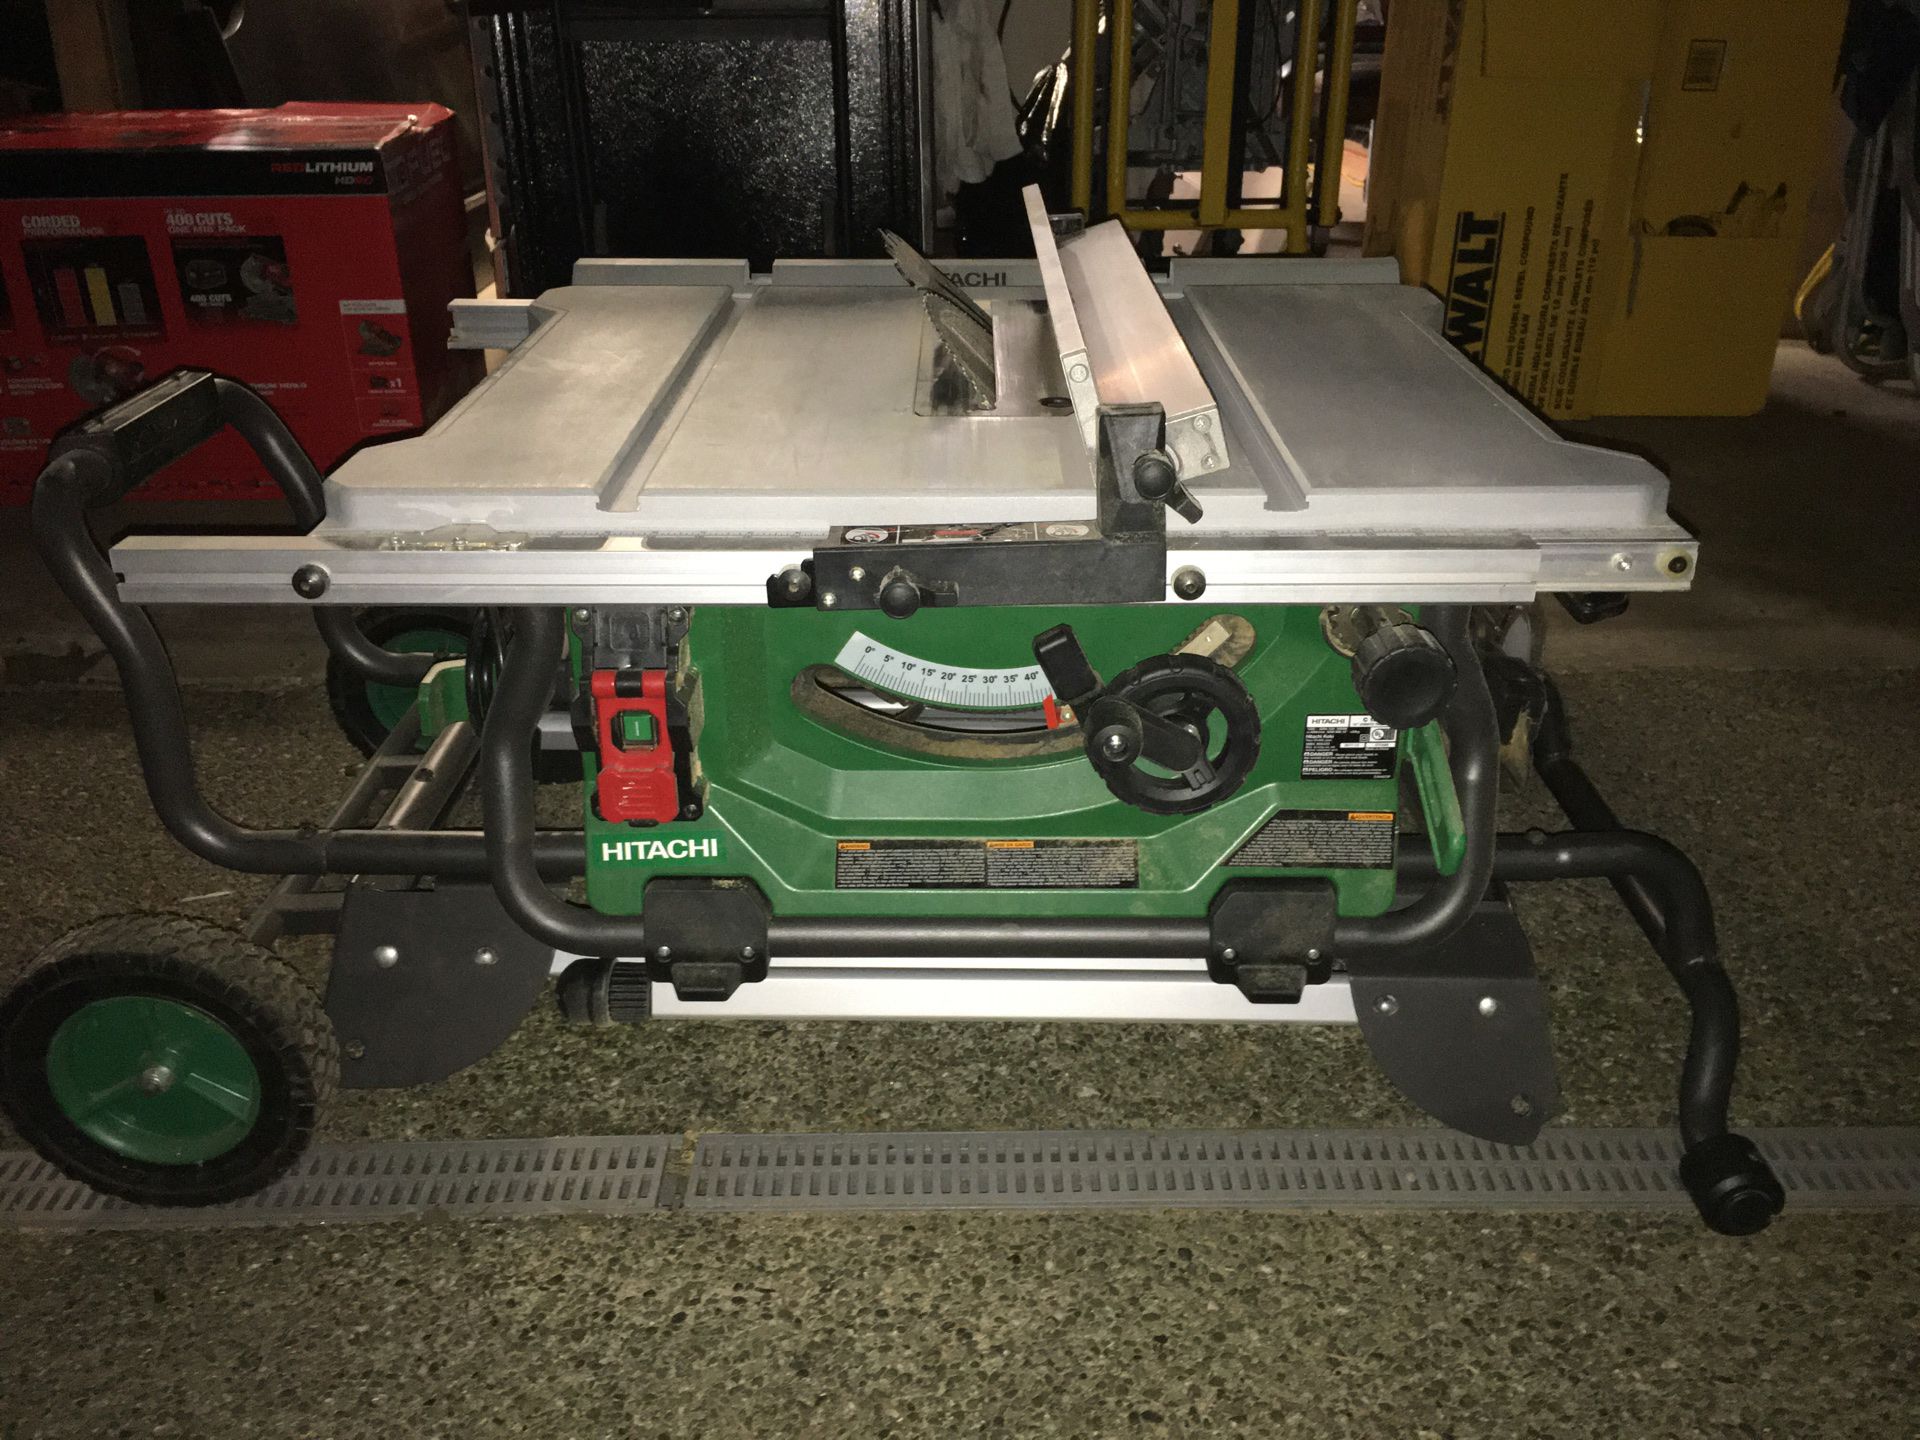 Hitachi 10” job site table saw and 12” compound mitre saw